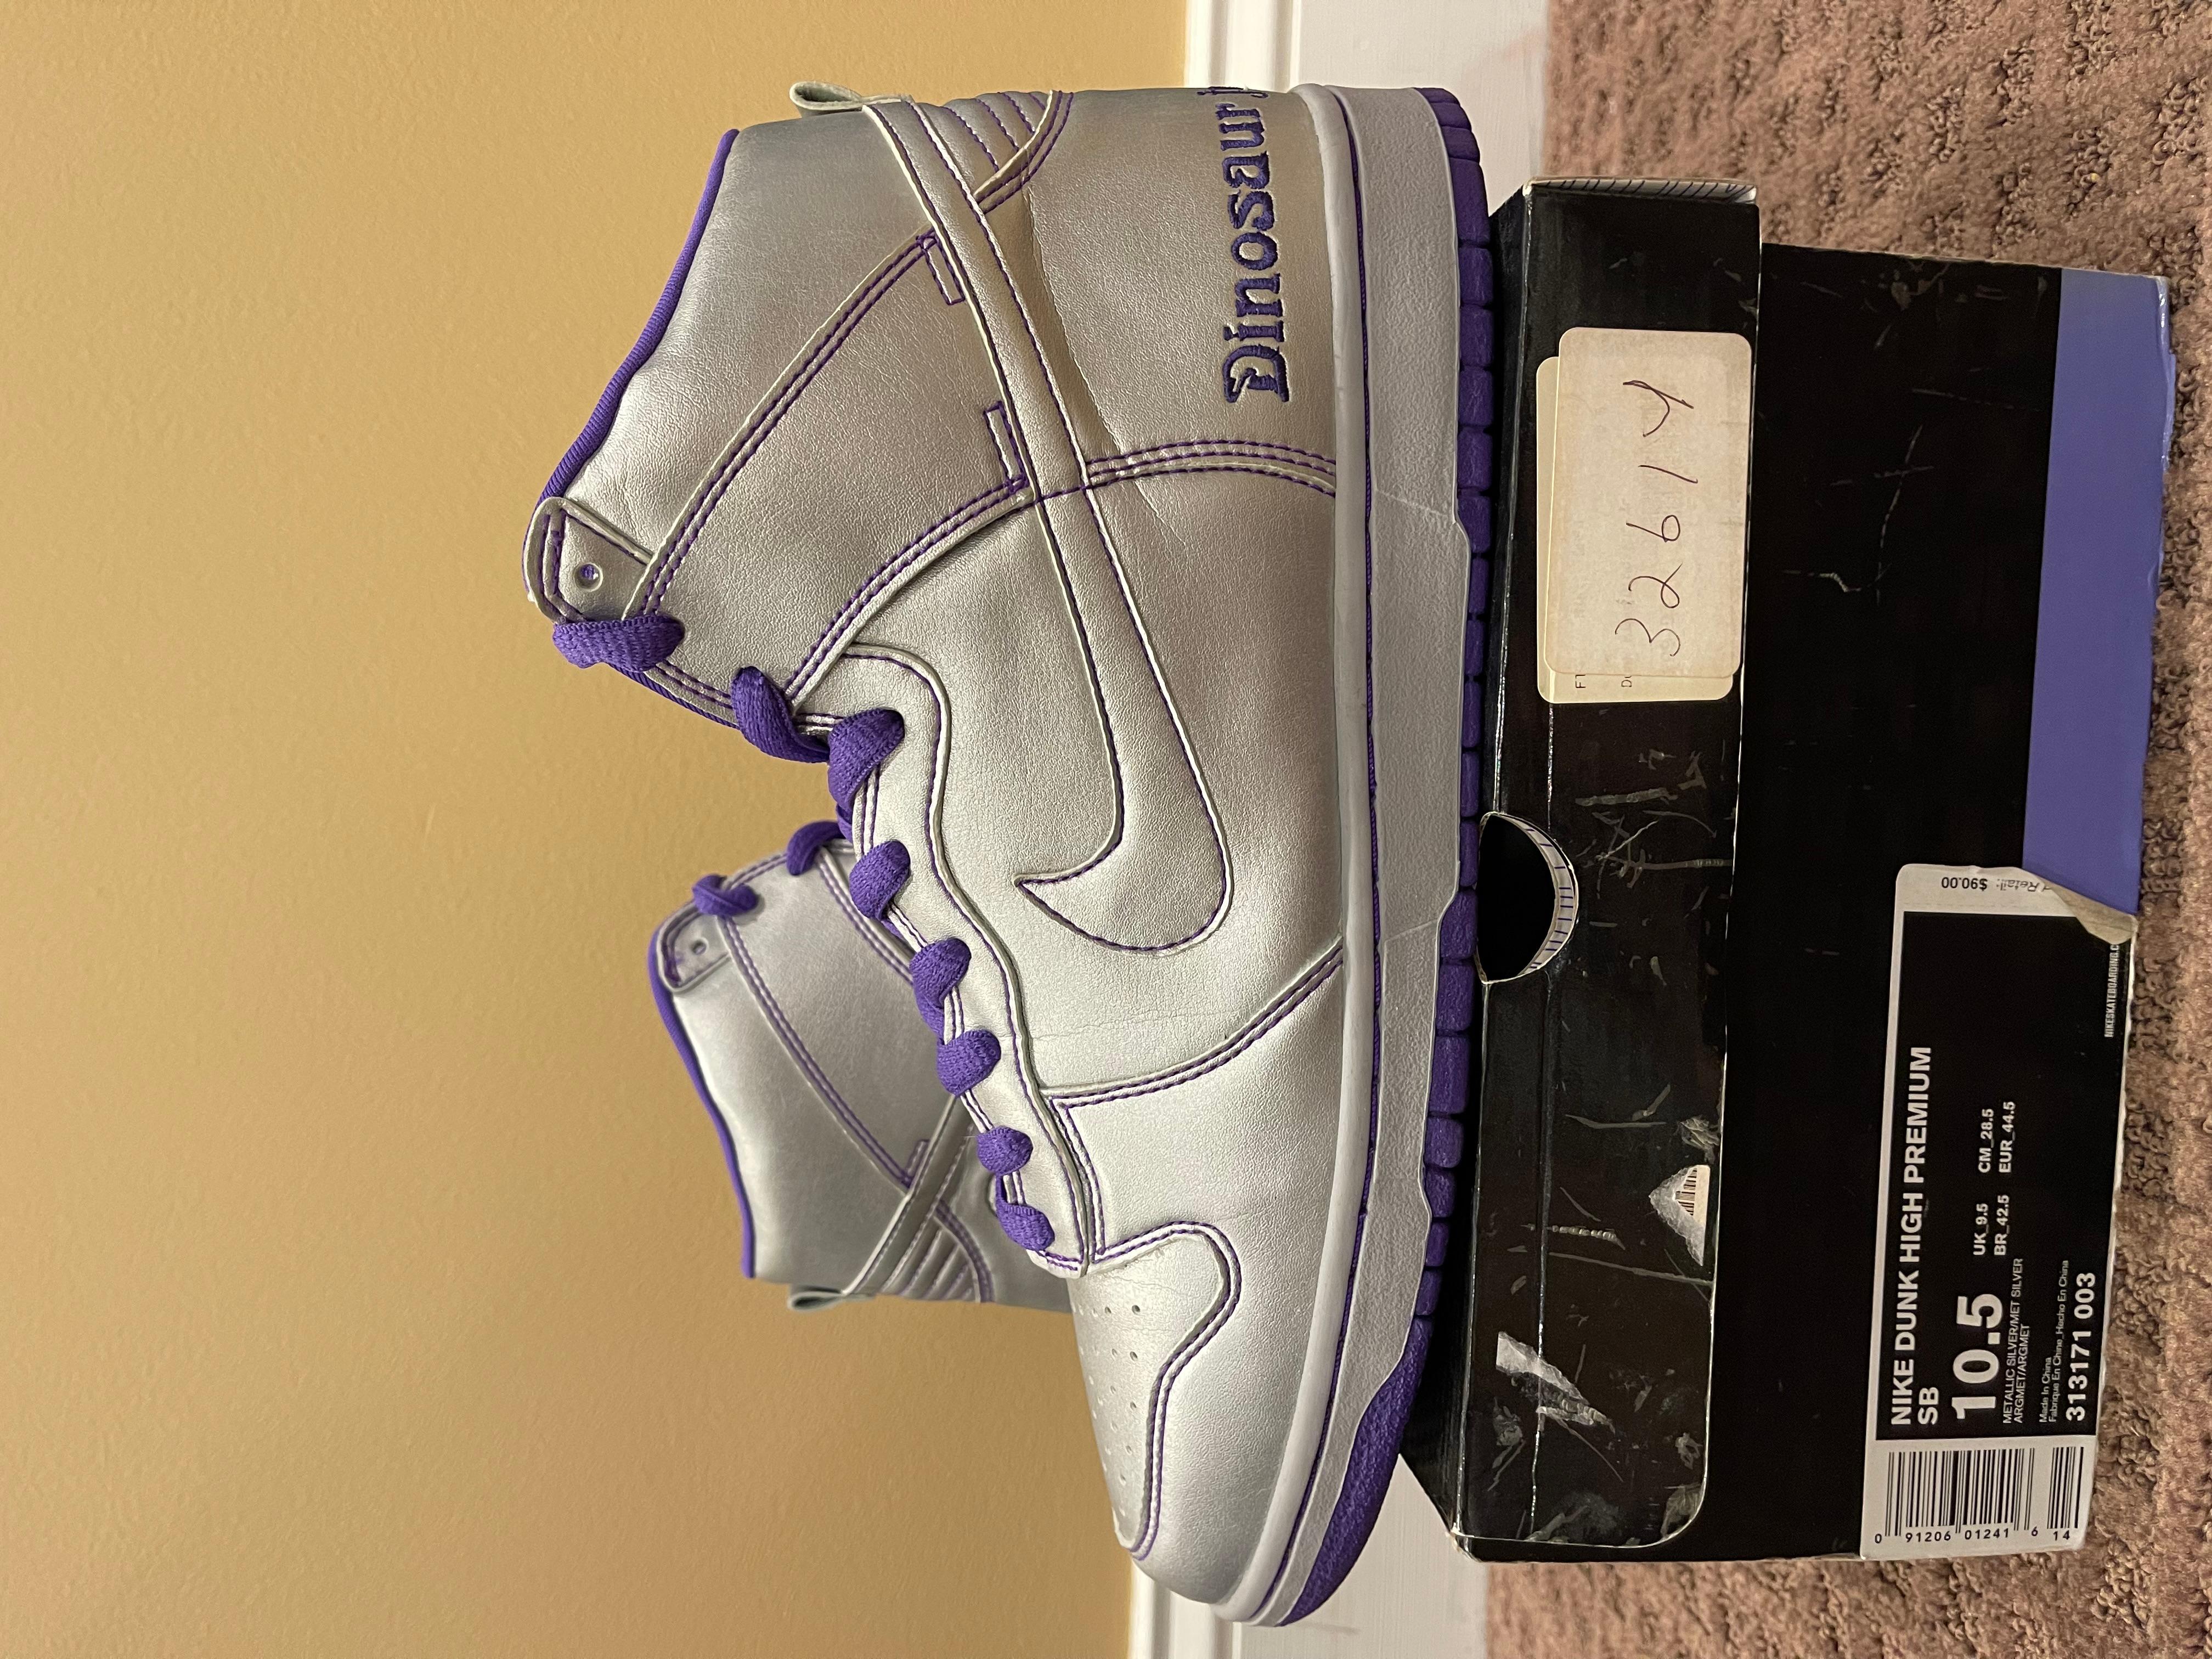 Nike Dunk High Premium SB Dinosaur Jr 2007

size 10.5

Og all as seen

Very rare shoe. OG HEAT

Excellent condition, especially considering the age